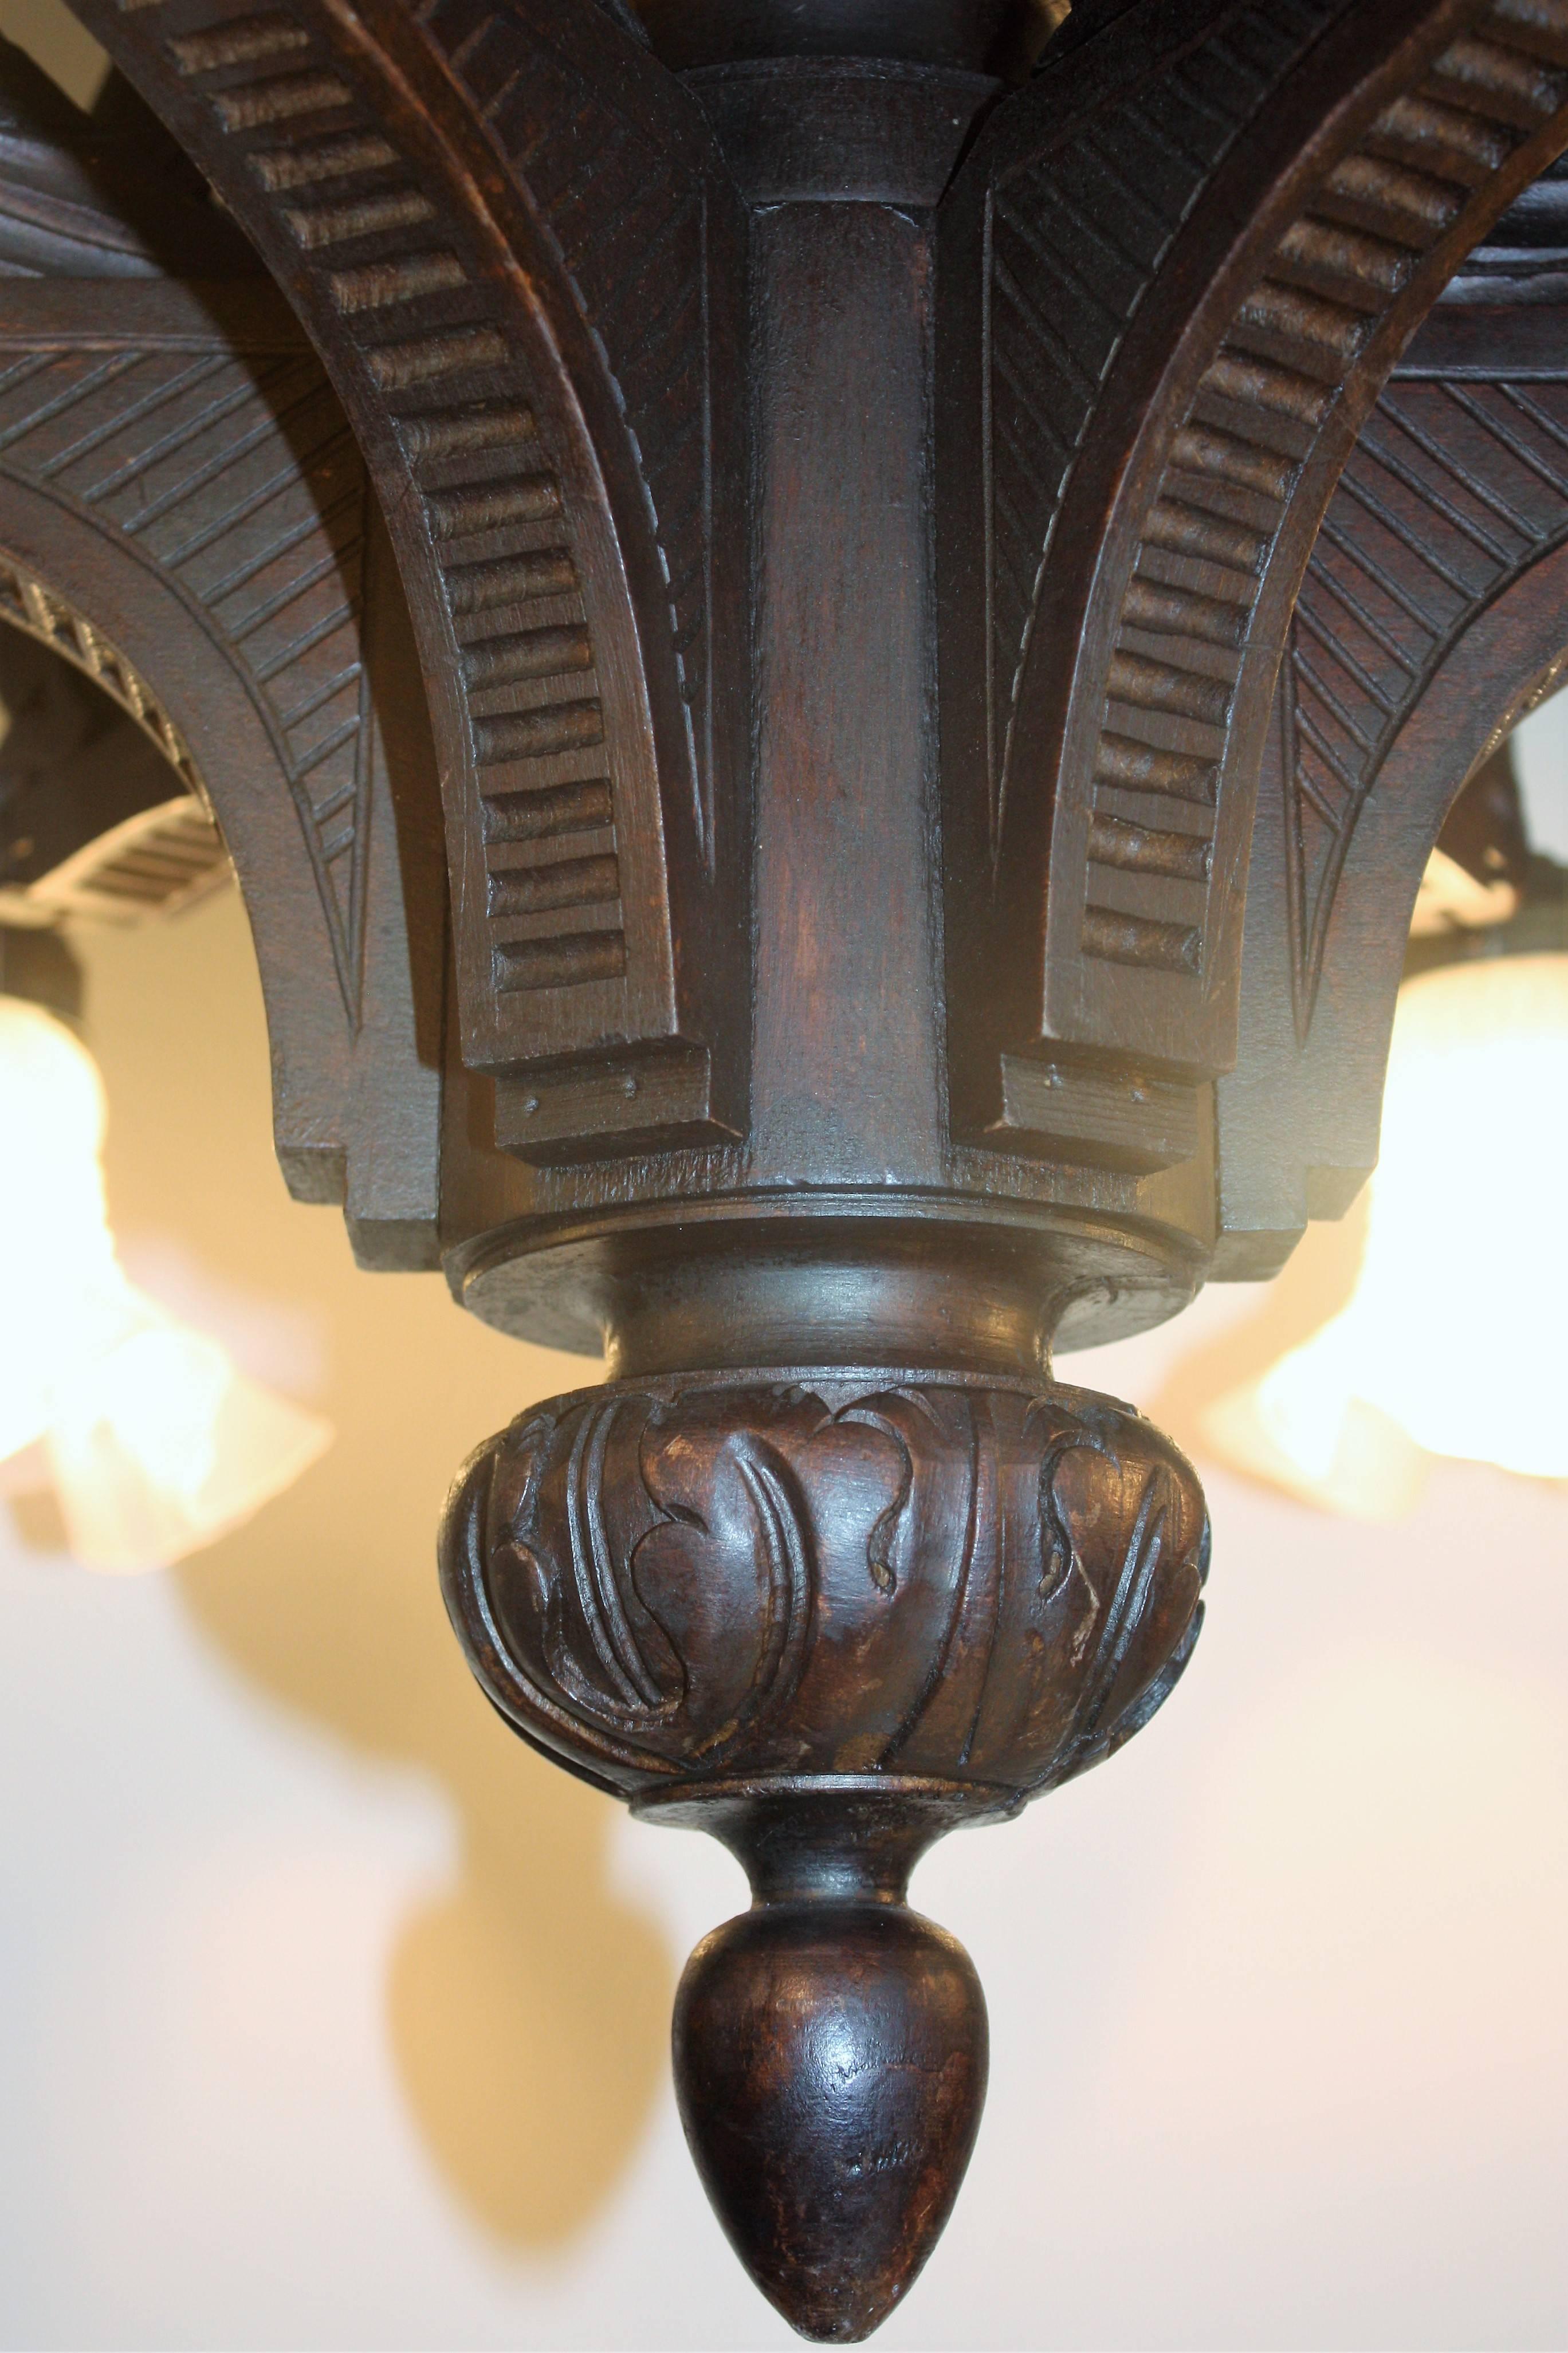 Hand-Crafted Stunning Six-Light Wooden Chandelier, Hand-Carved, circa 1900 Gothik Style